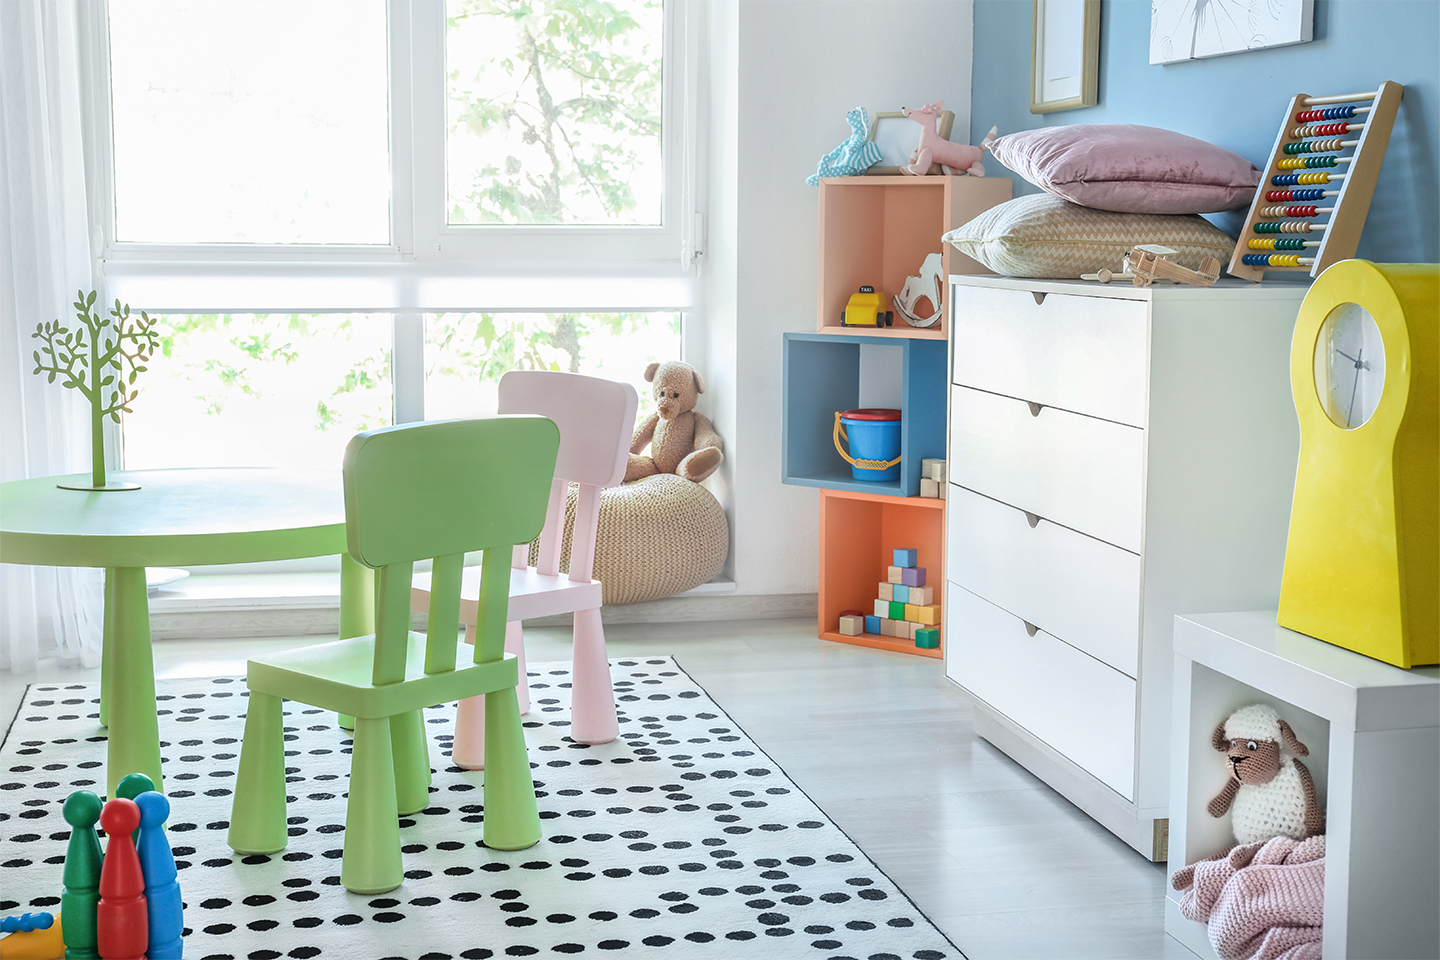 How about transforming that extra space as a room for your kids to play or be creative?